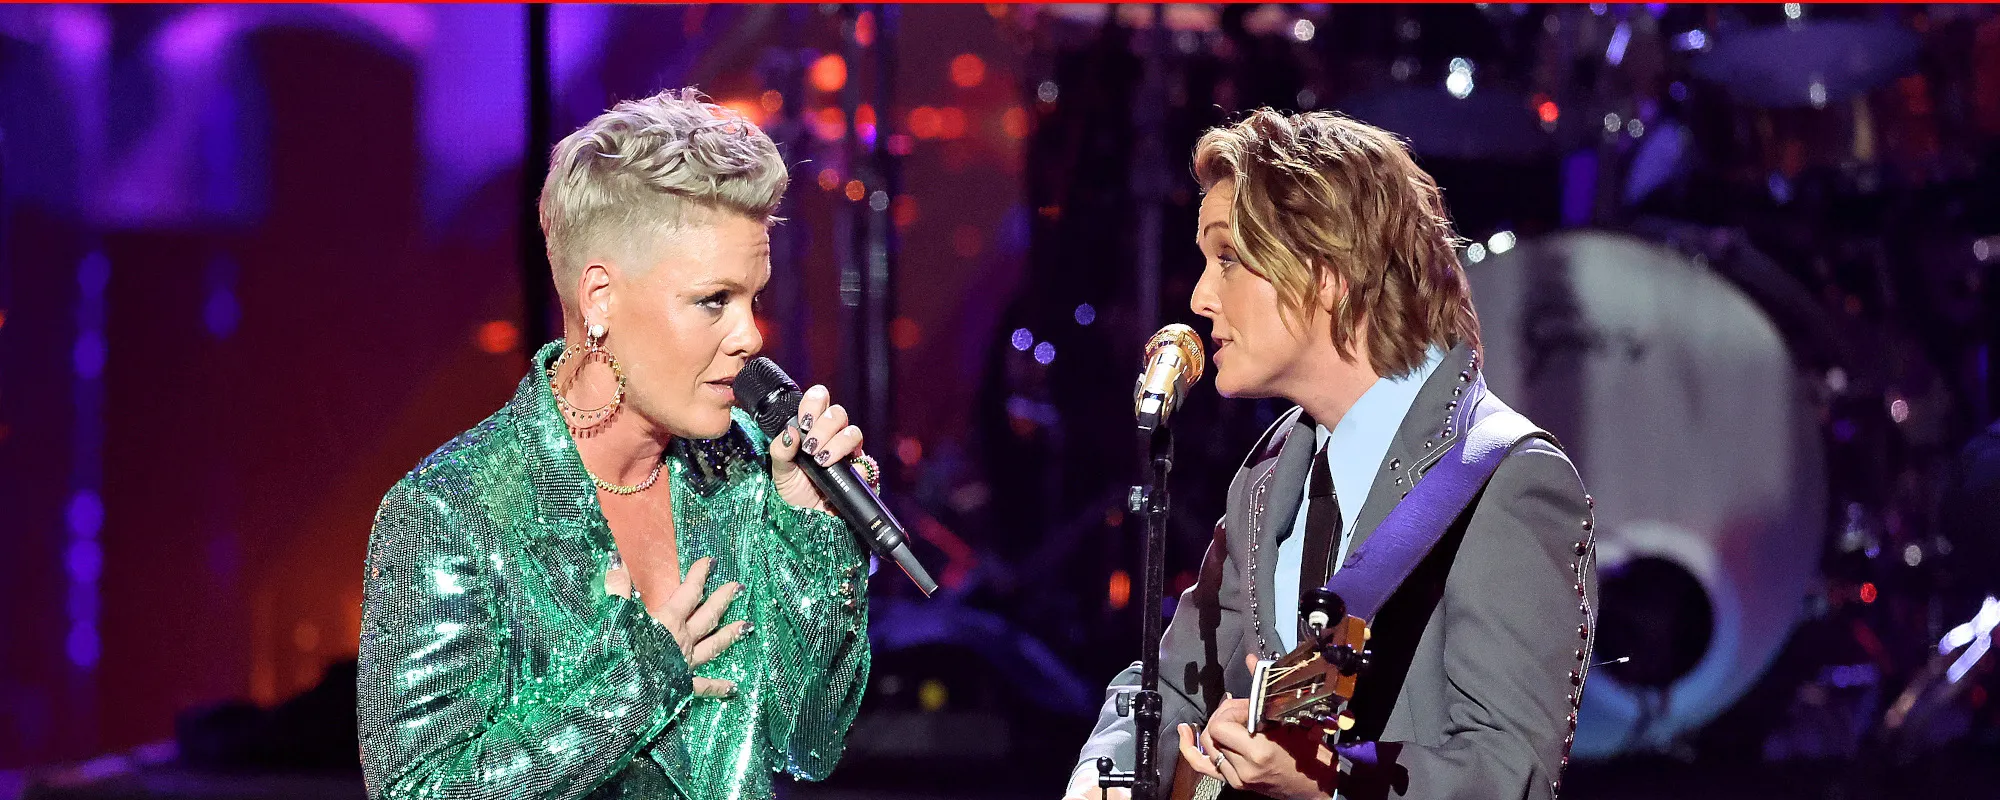 Watch: P!nk and Brandi Carlile’s Emotional Tribute to Sinéad O’Connor